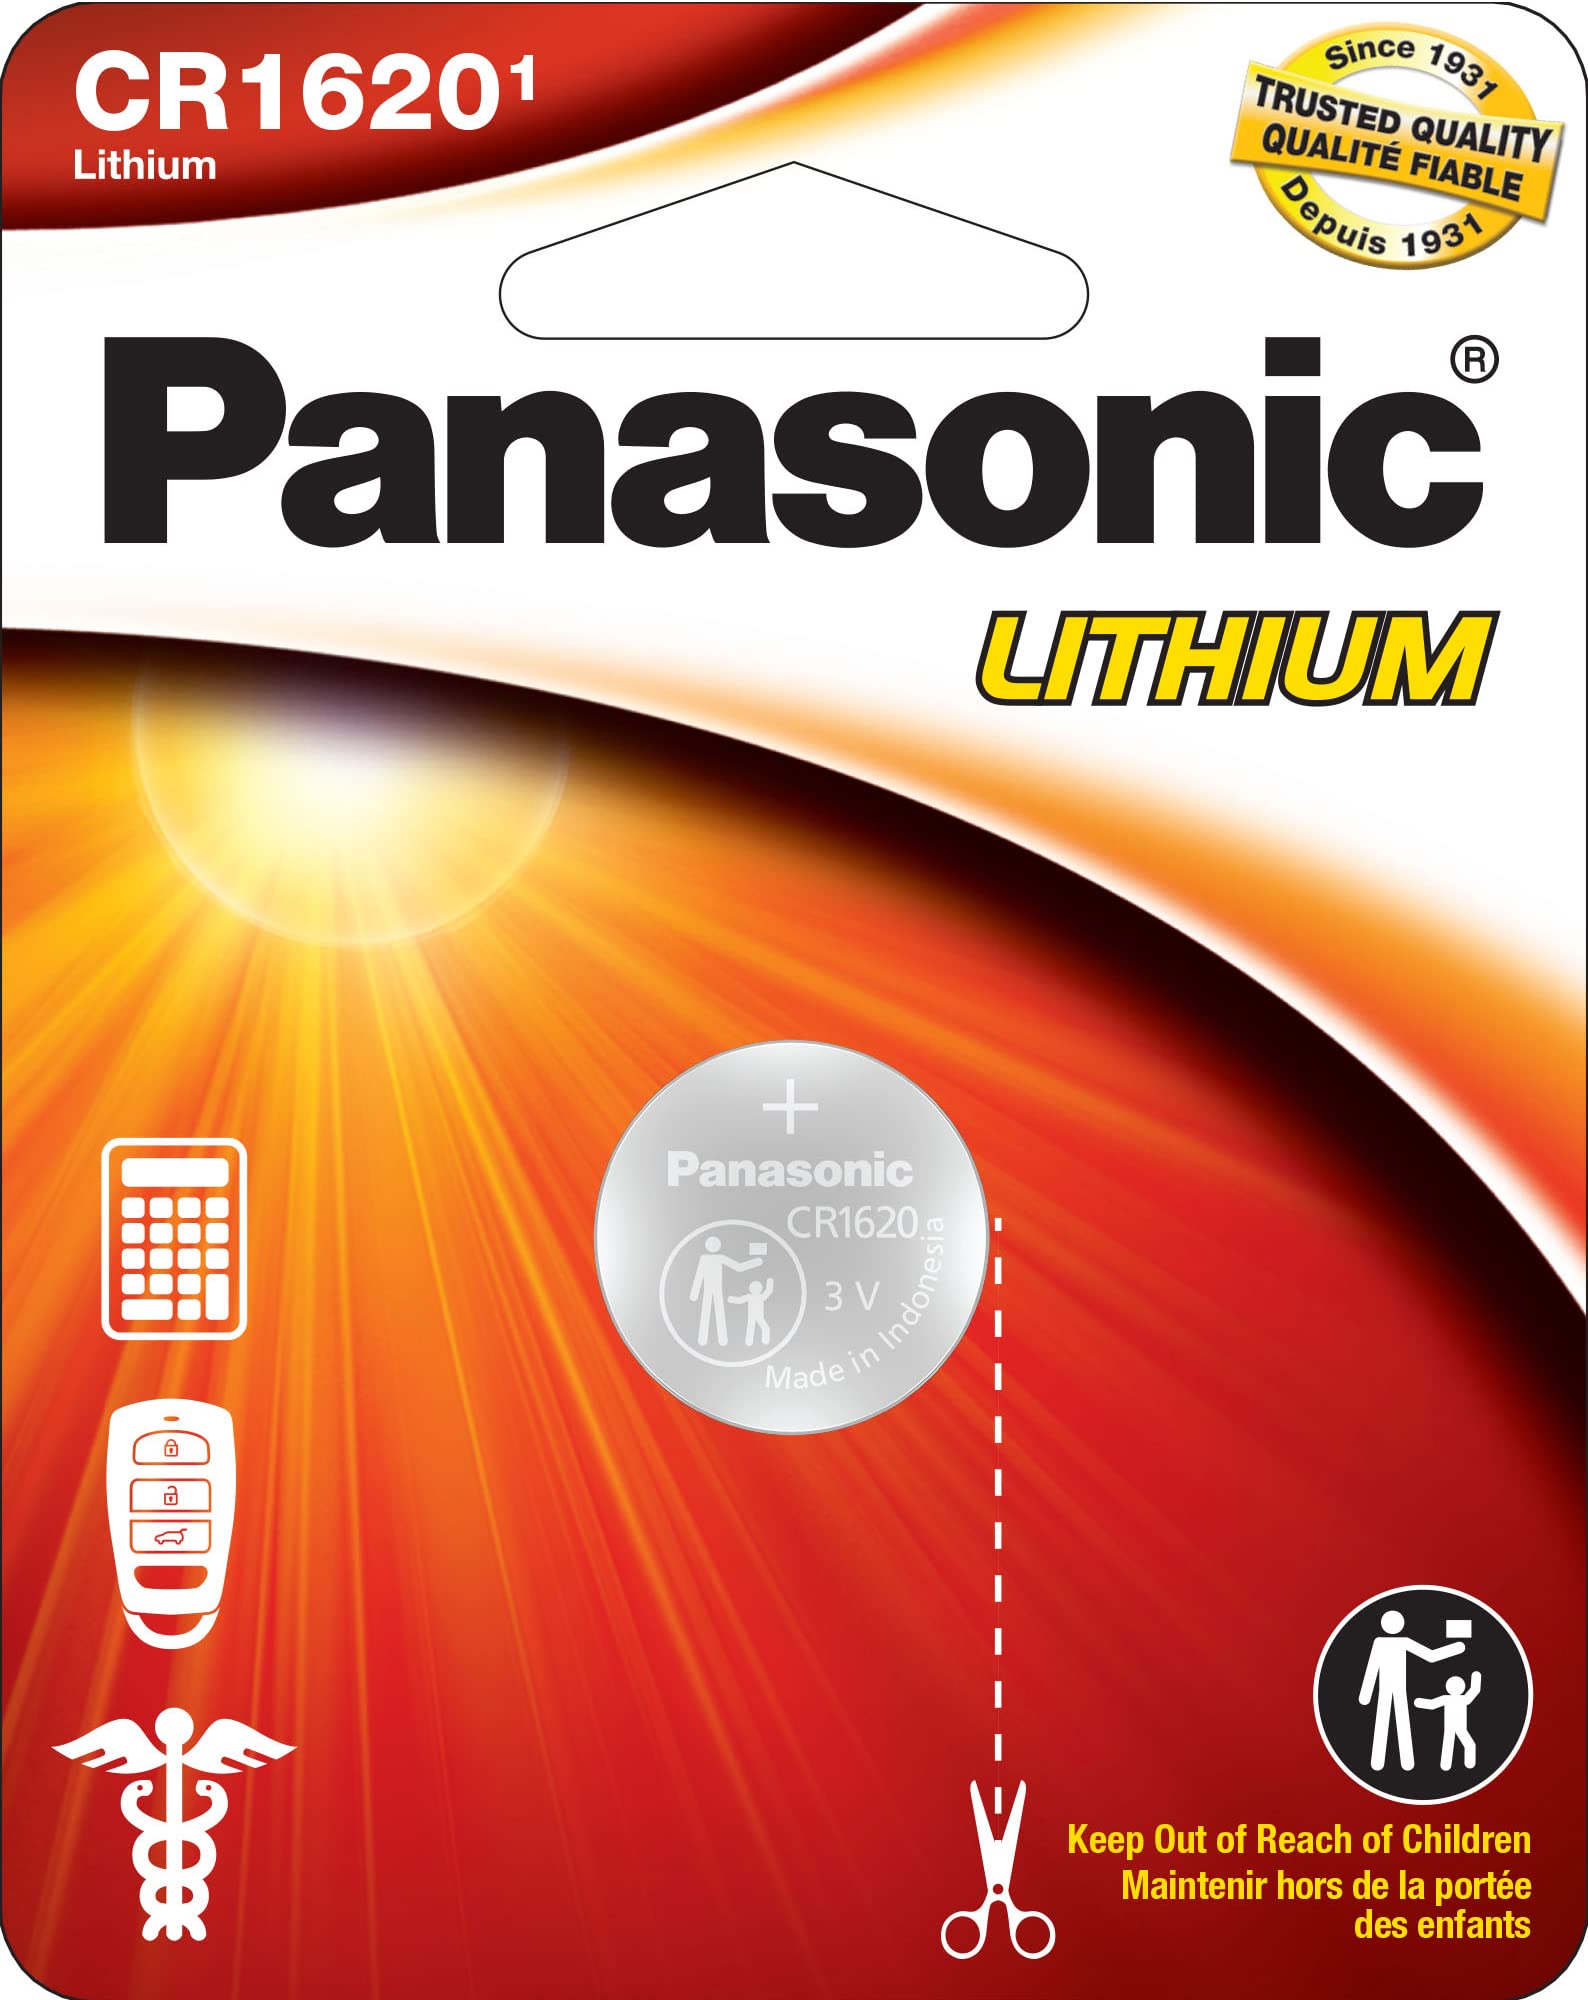 Panasonic CR1620 3.0 Volt Long Lasting Lithium Coin Cell Batteries in Child Resistant, Standards Based Packaging, 1-Battery Pack